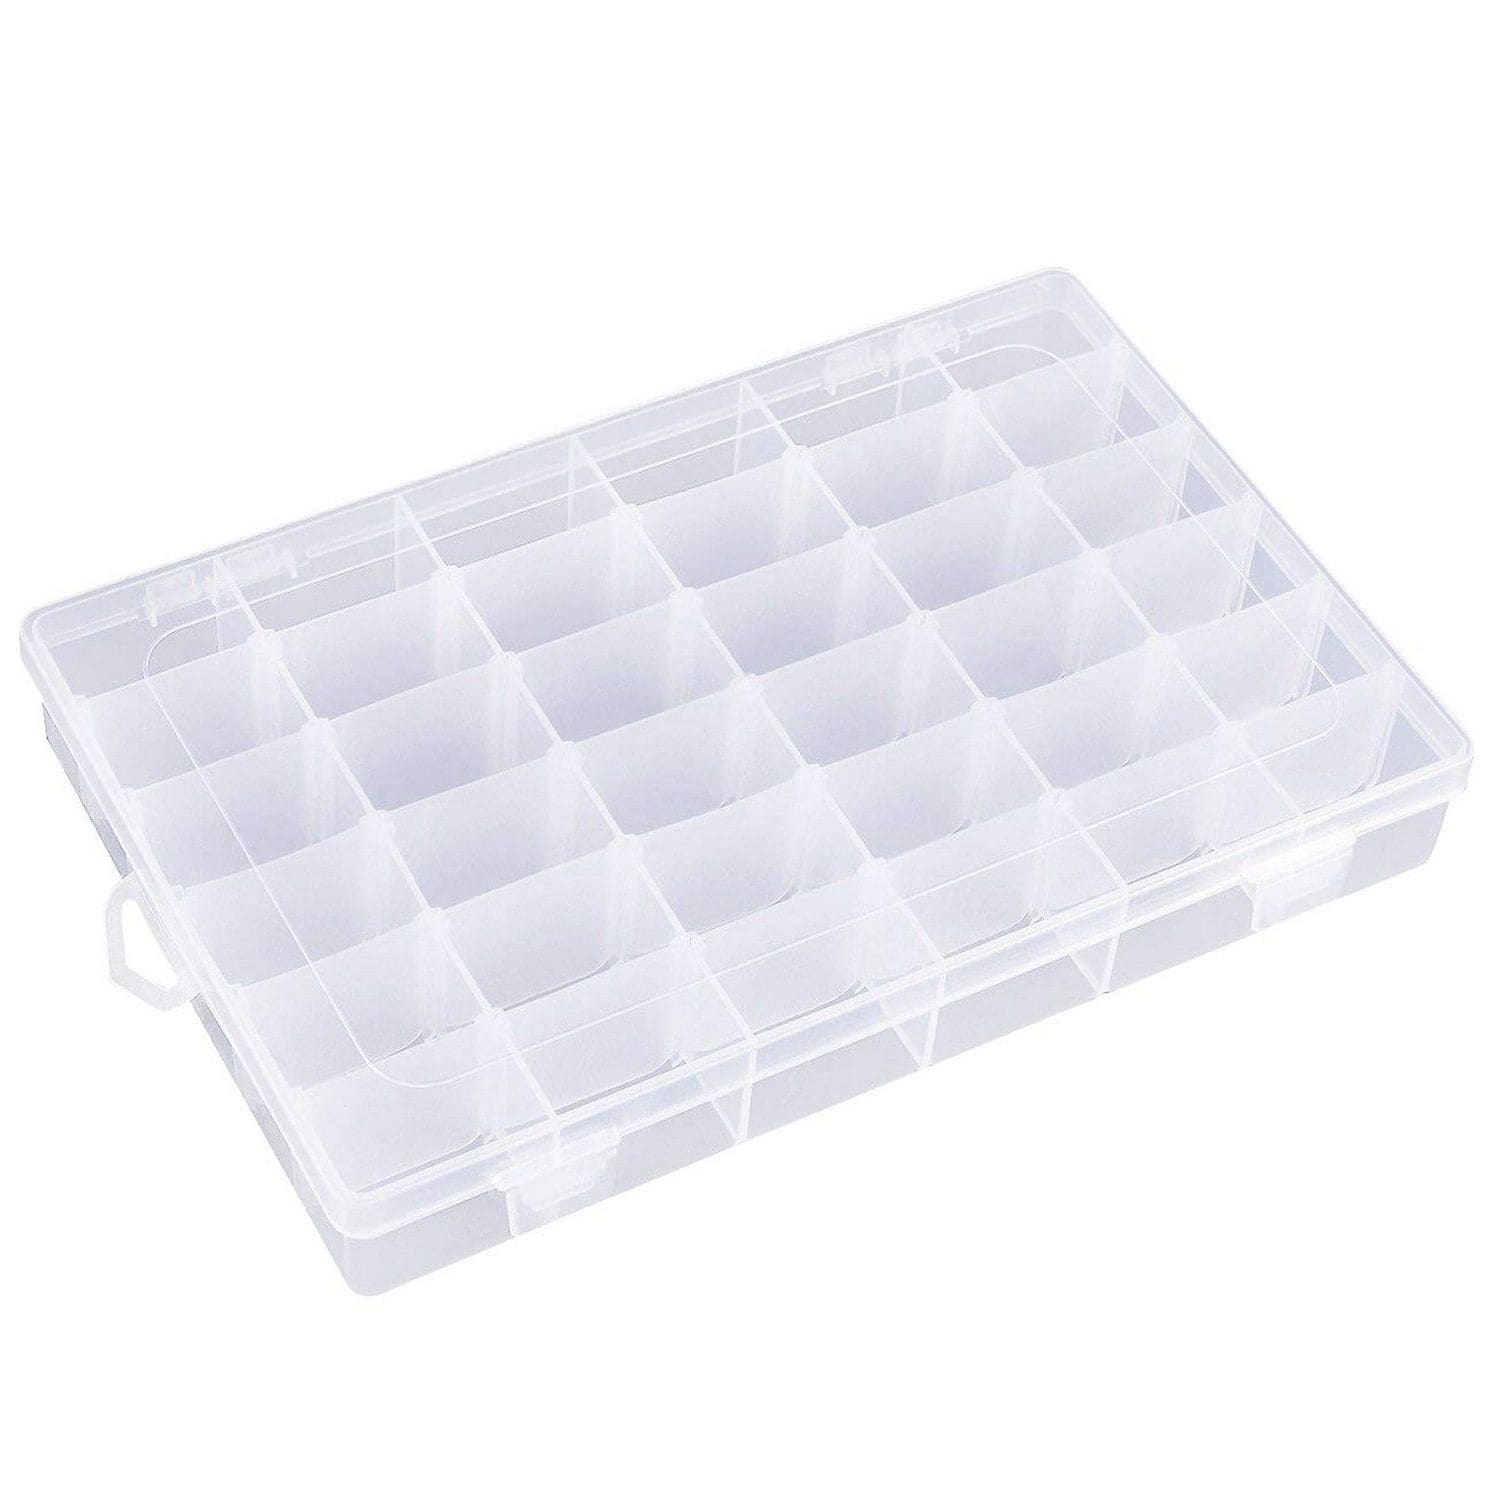 3 Pack Jewelry Organizer Box for Earrings, Clear Plastic Bead Storage  Containers for Crafts (36 Compartments) 